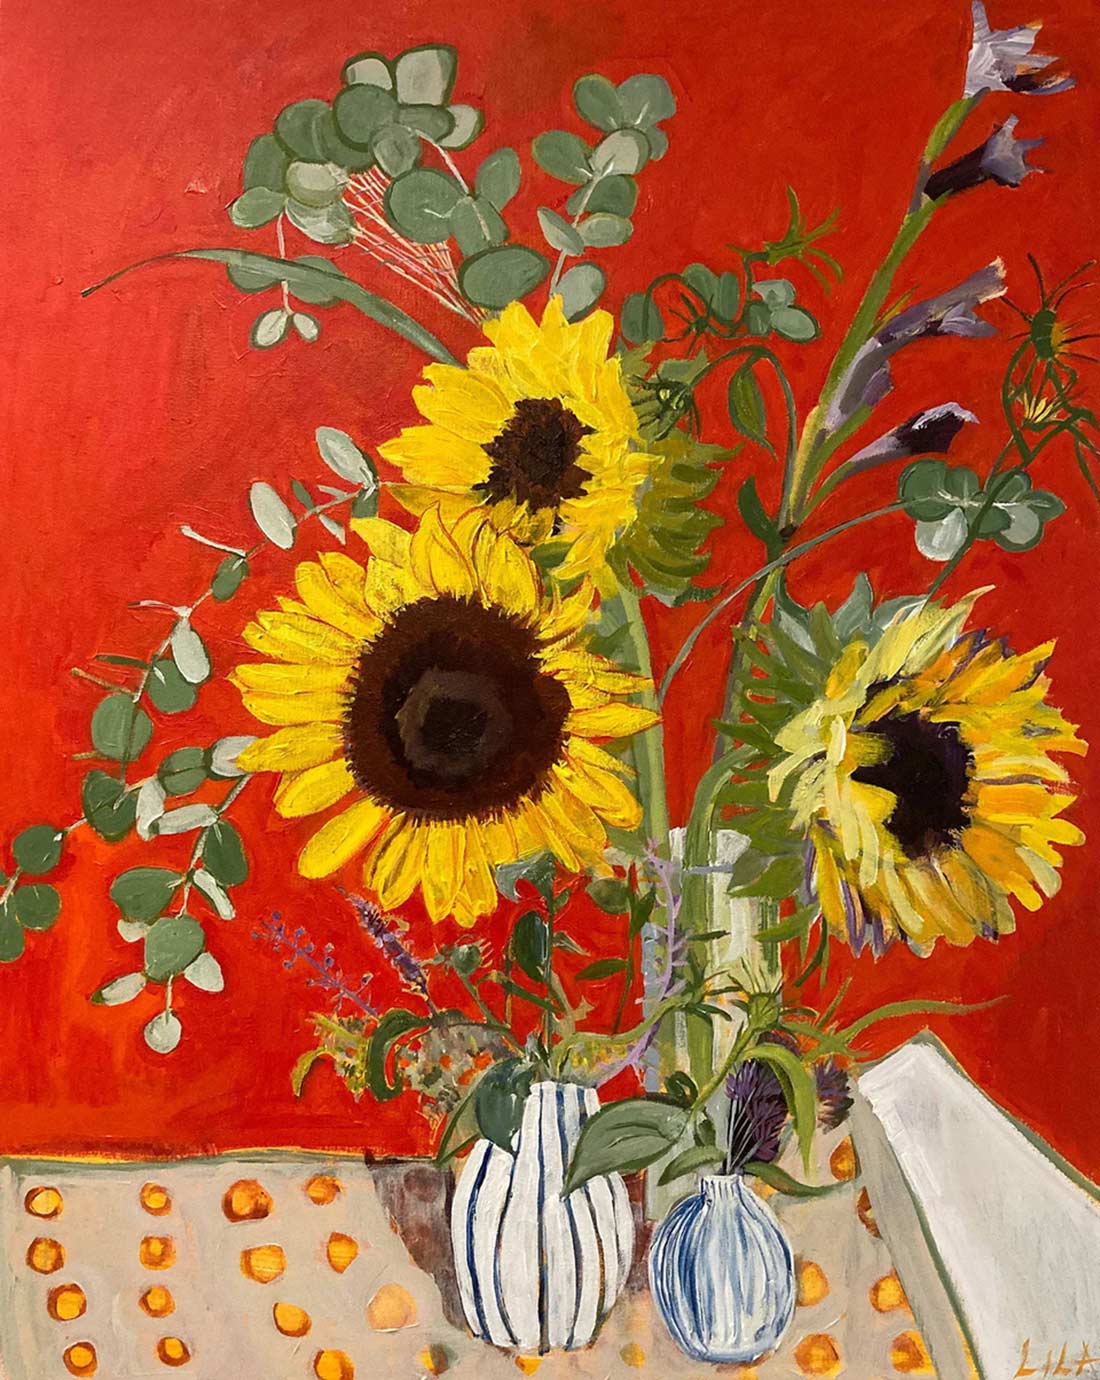 painting of sunflowers by Lila Bacon